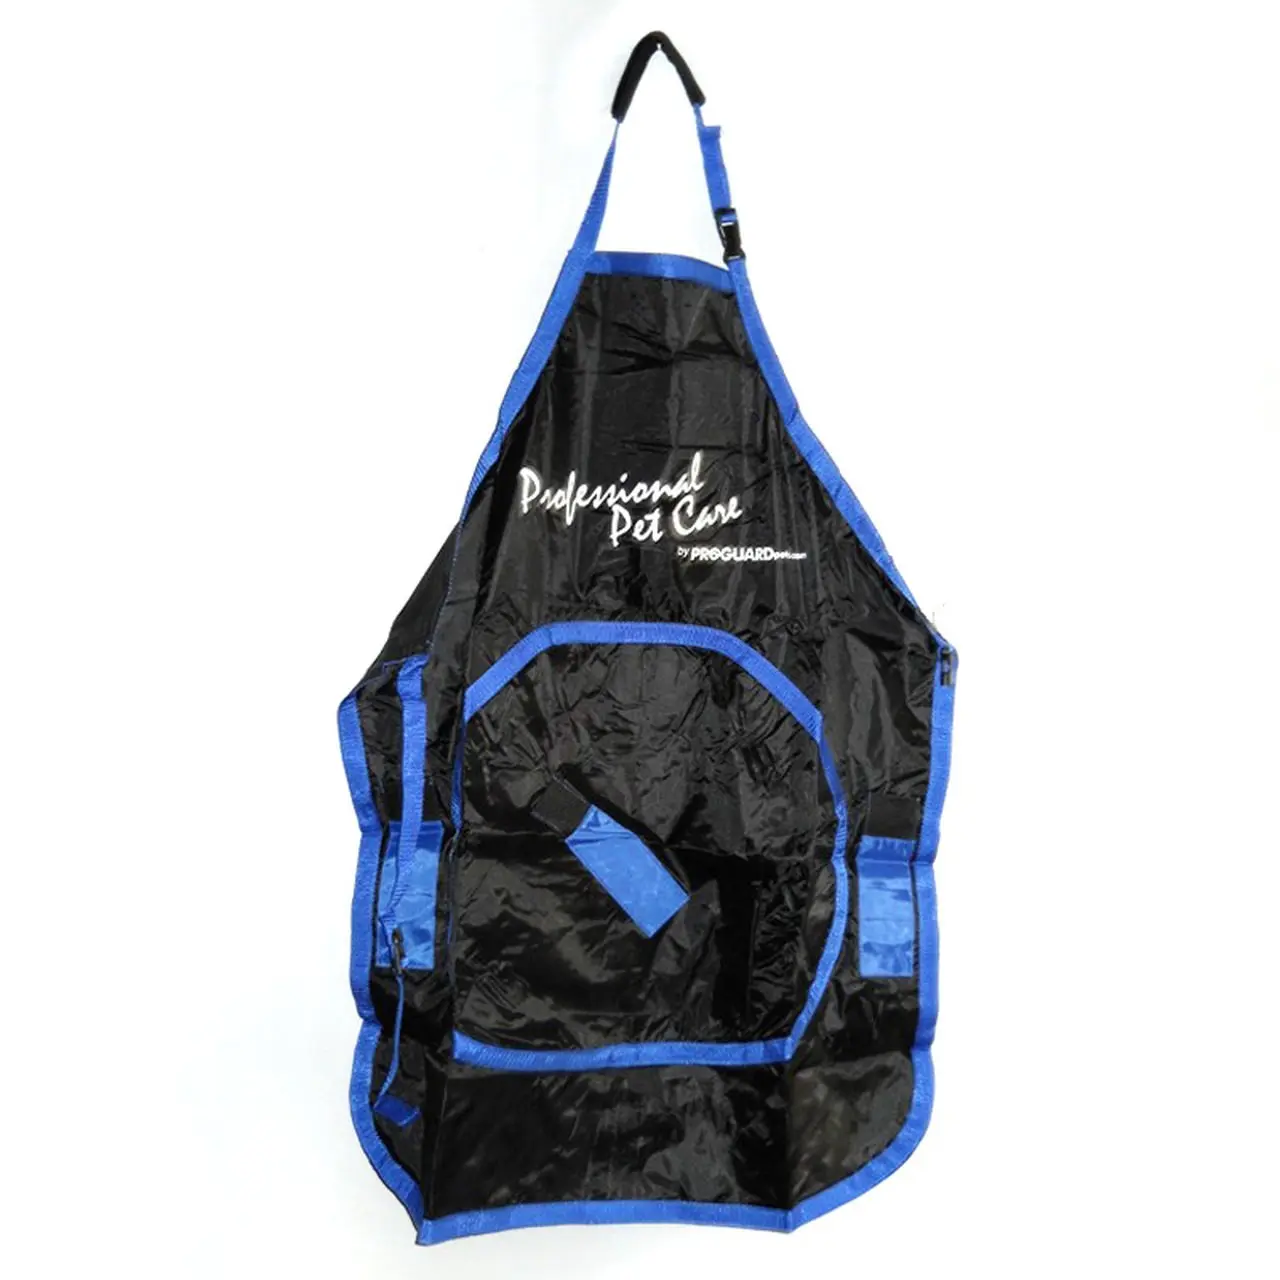 Deluxe Grooming Apron in Black/Blue by Proguard